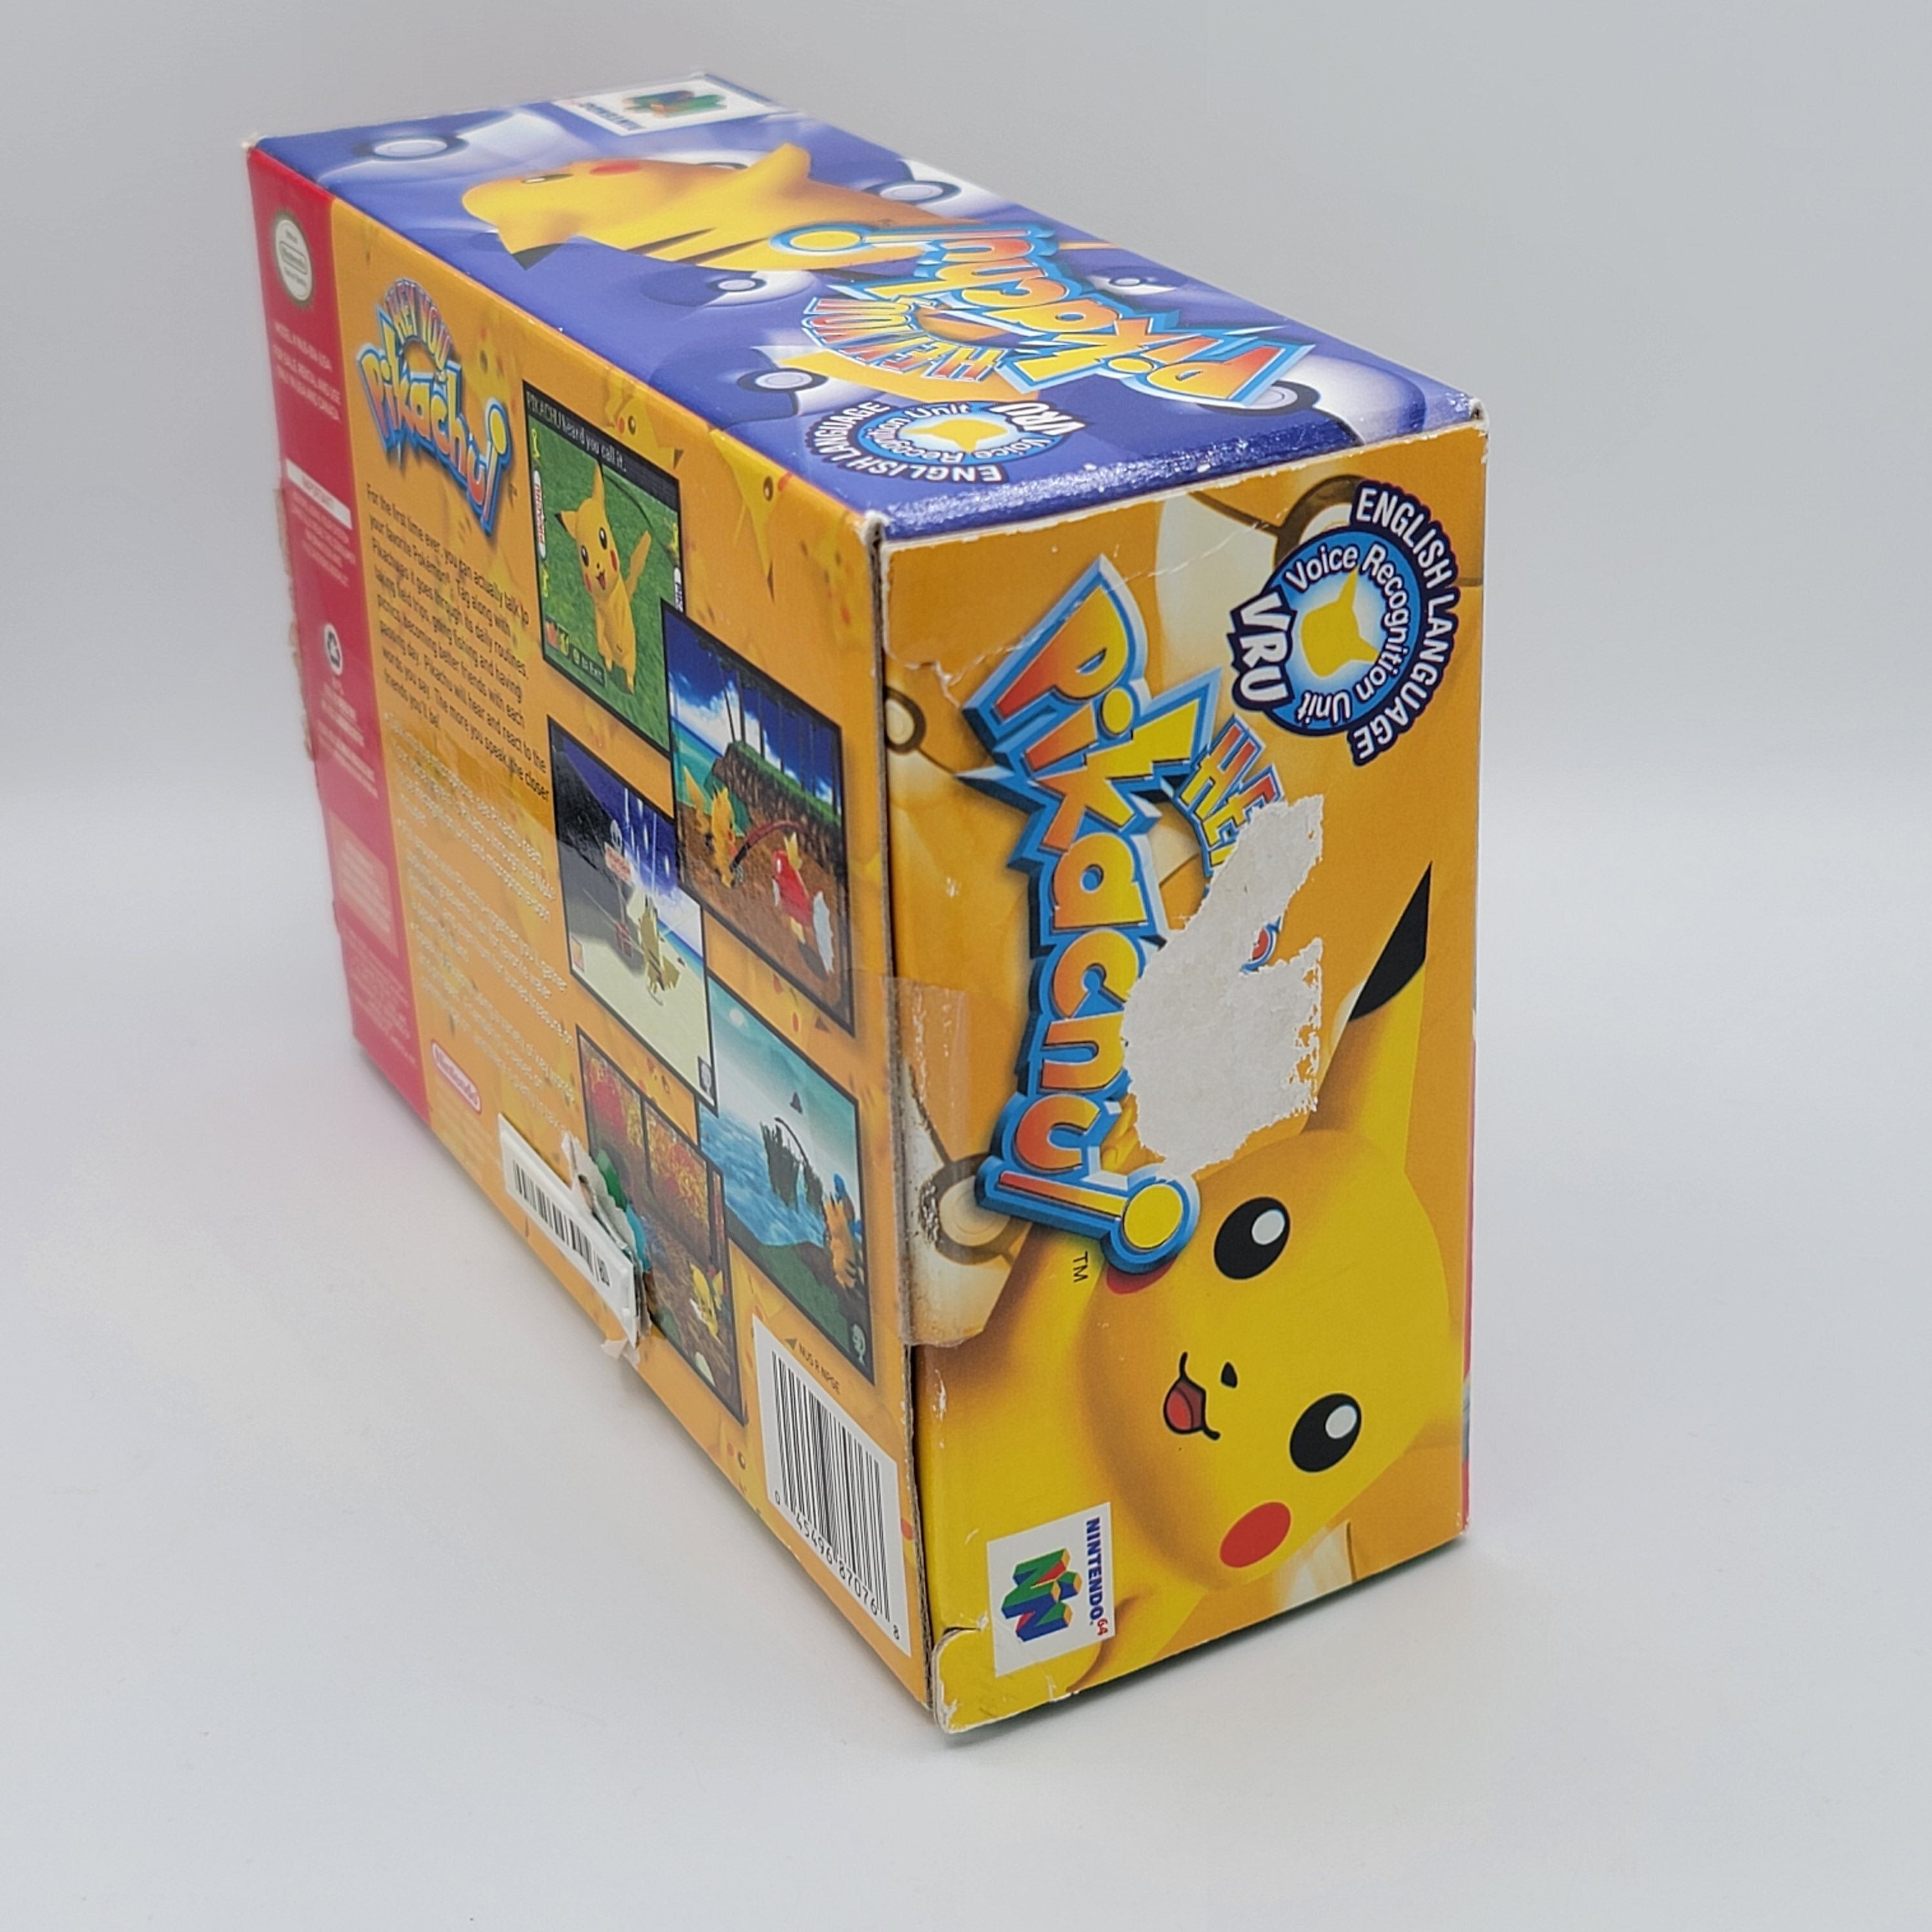 N64 - Hey You Pikachu (Complete in Box / B / With Manual / No Controller Clip or Mic Foam)